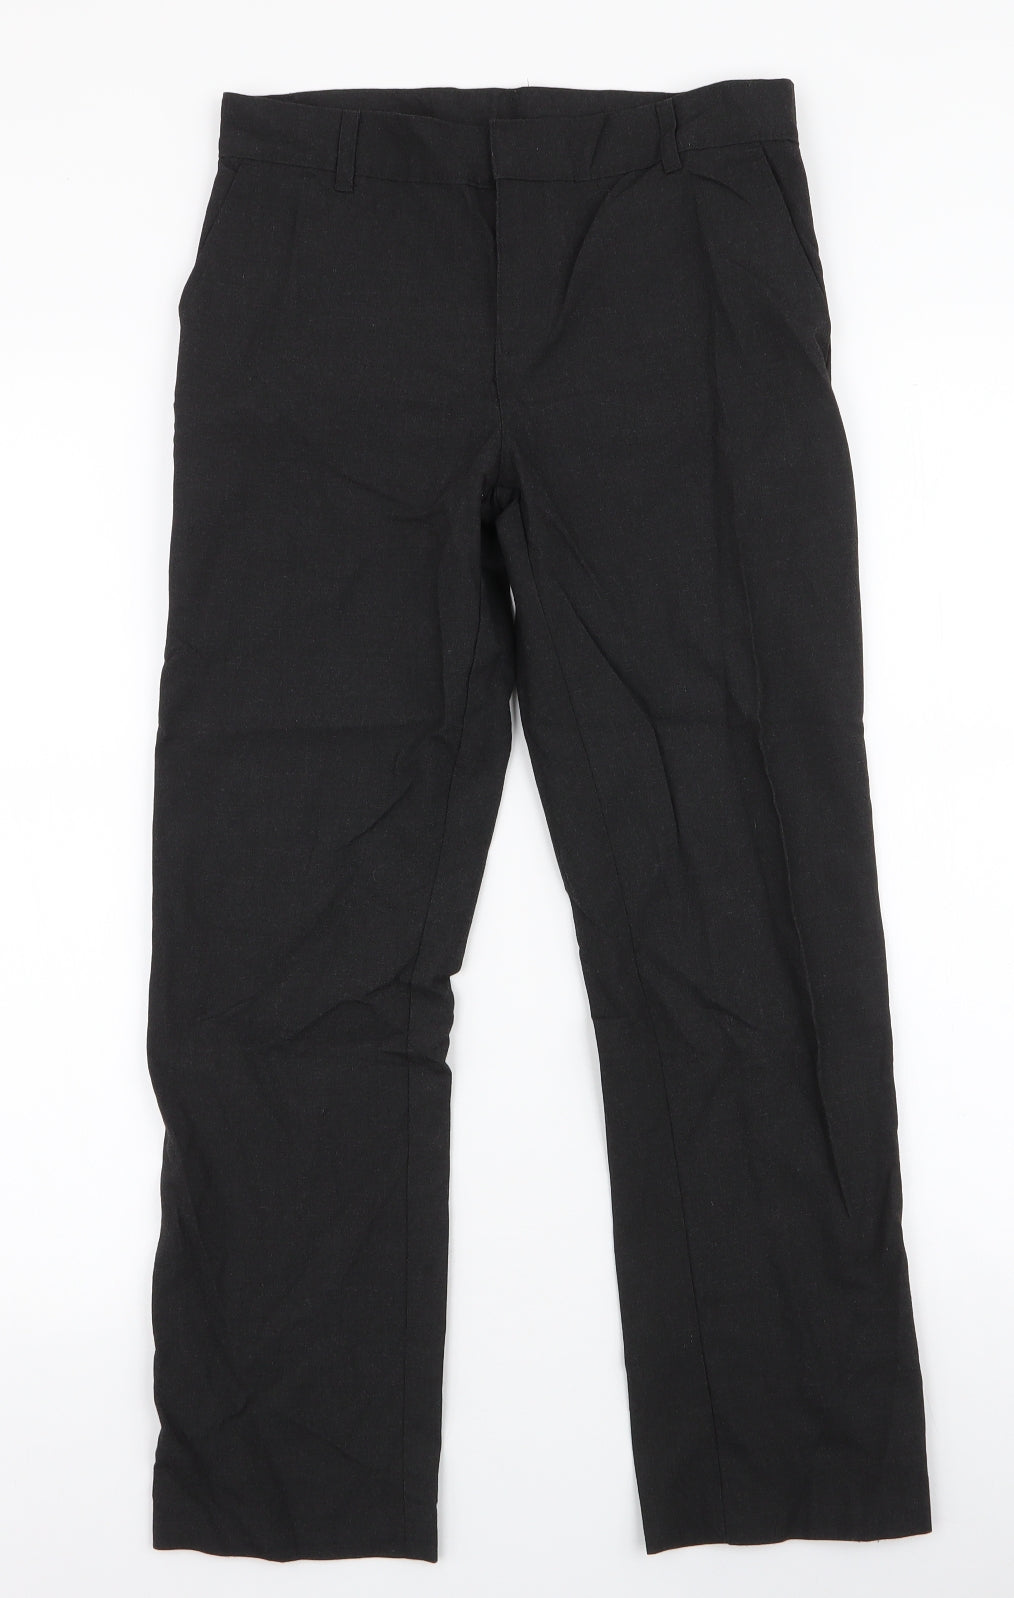 Marks and Spencer Boys Grey  Polyester Dress Pants Trousers Size 11-12 Years  Regular Zip